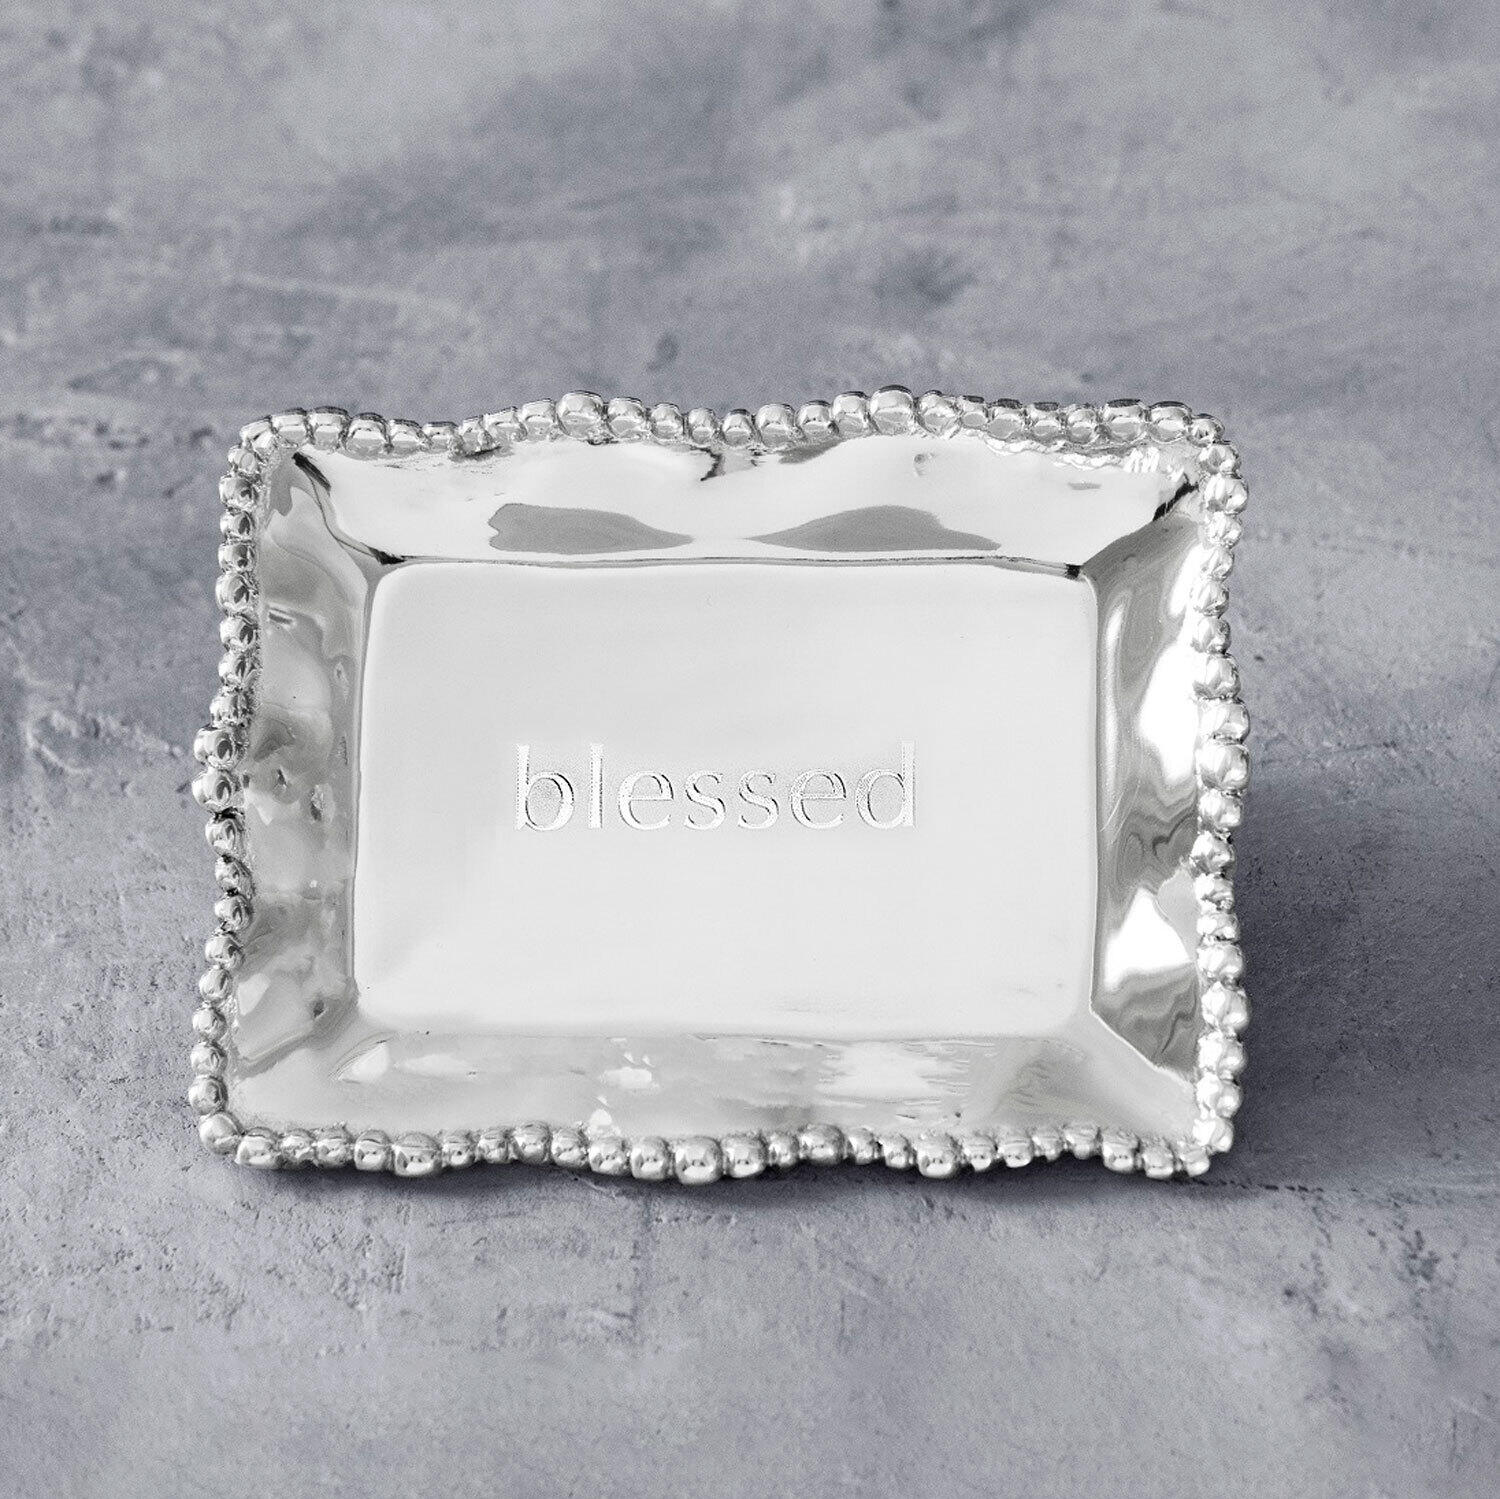 GIFTABLES Organic Pearl Rectangular Engraved Tray - blessed